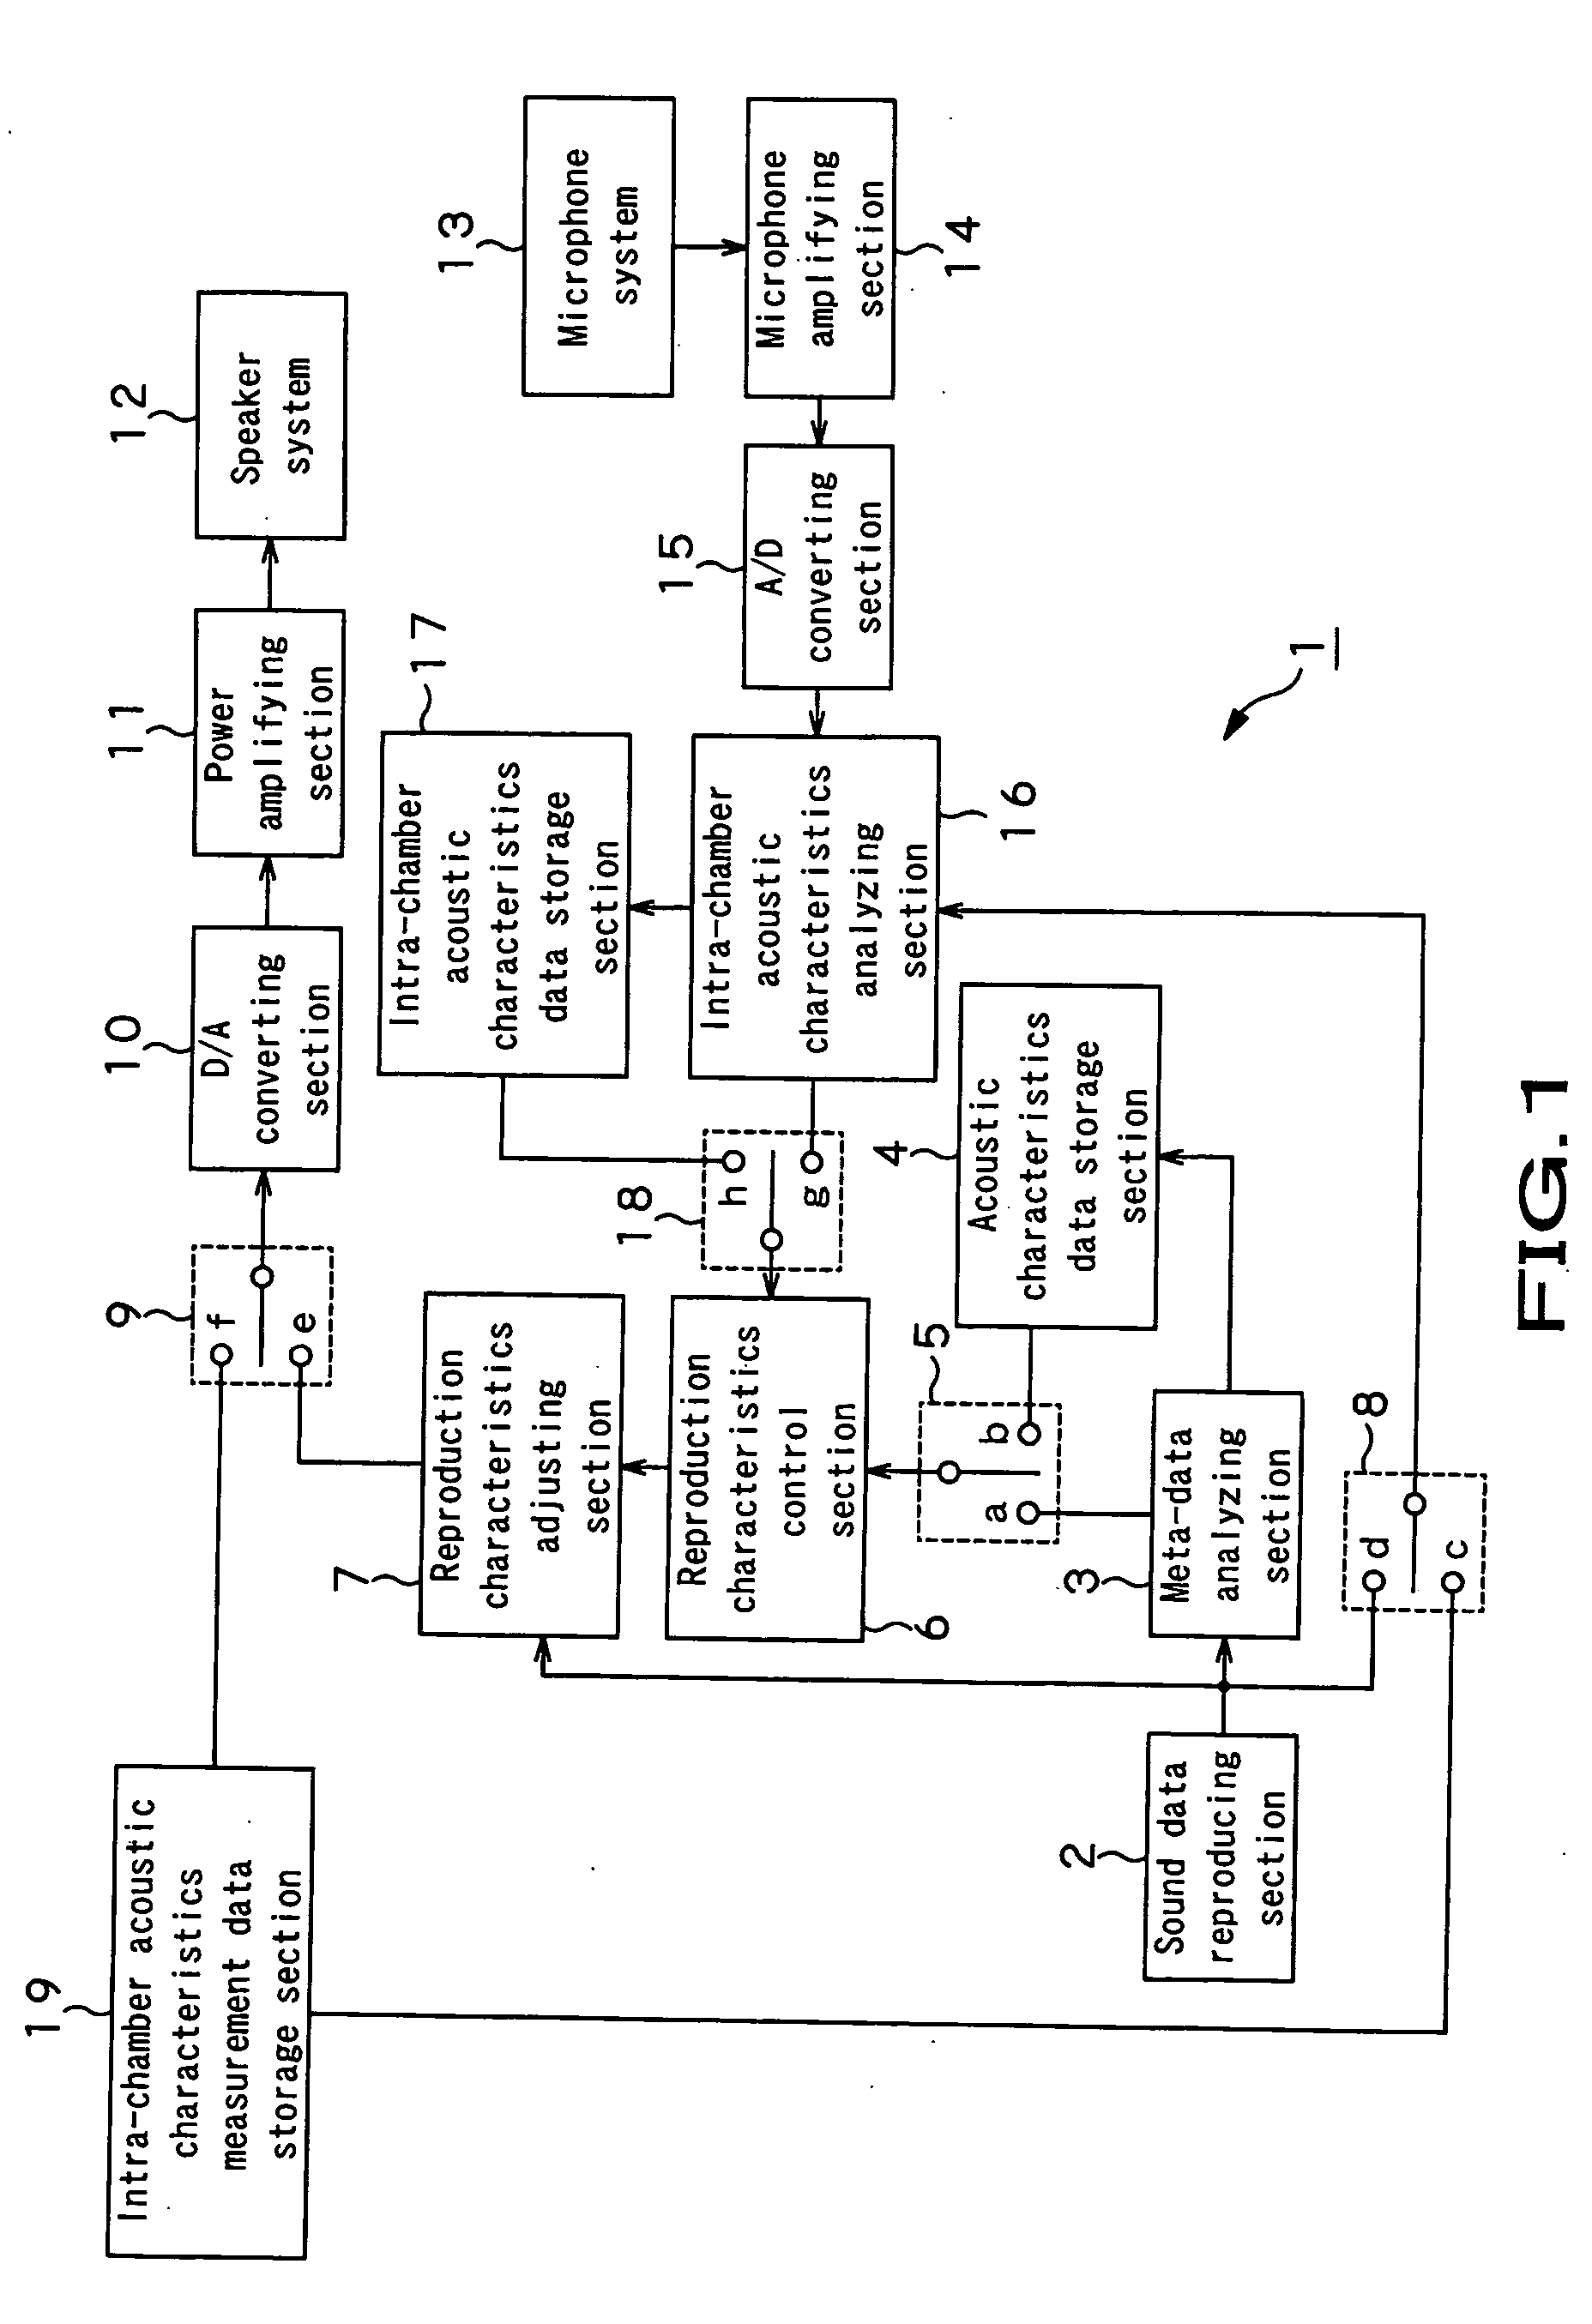 Reproduction apparatus and reproduction system